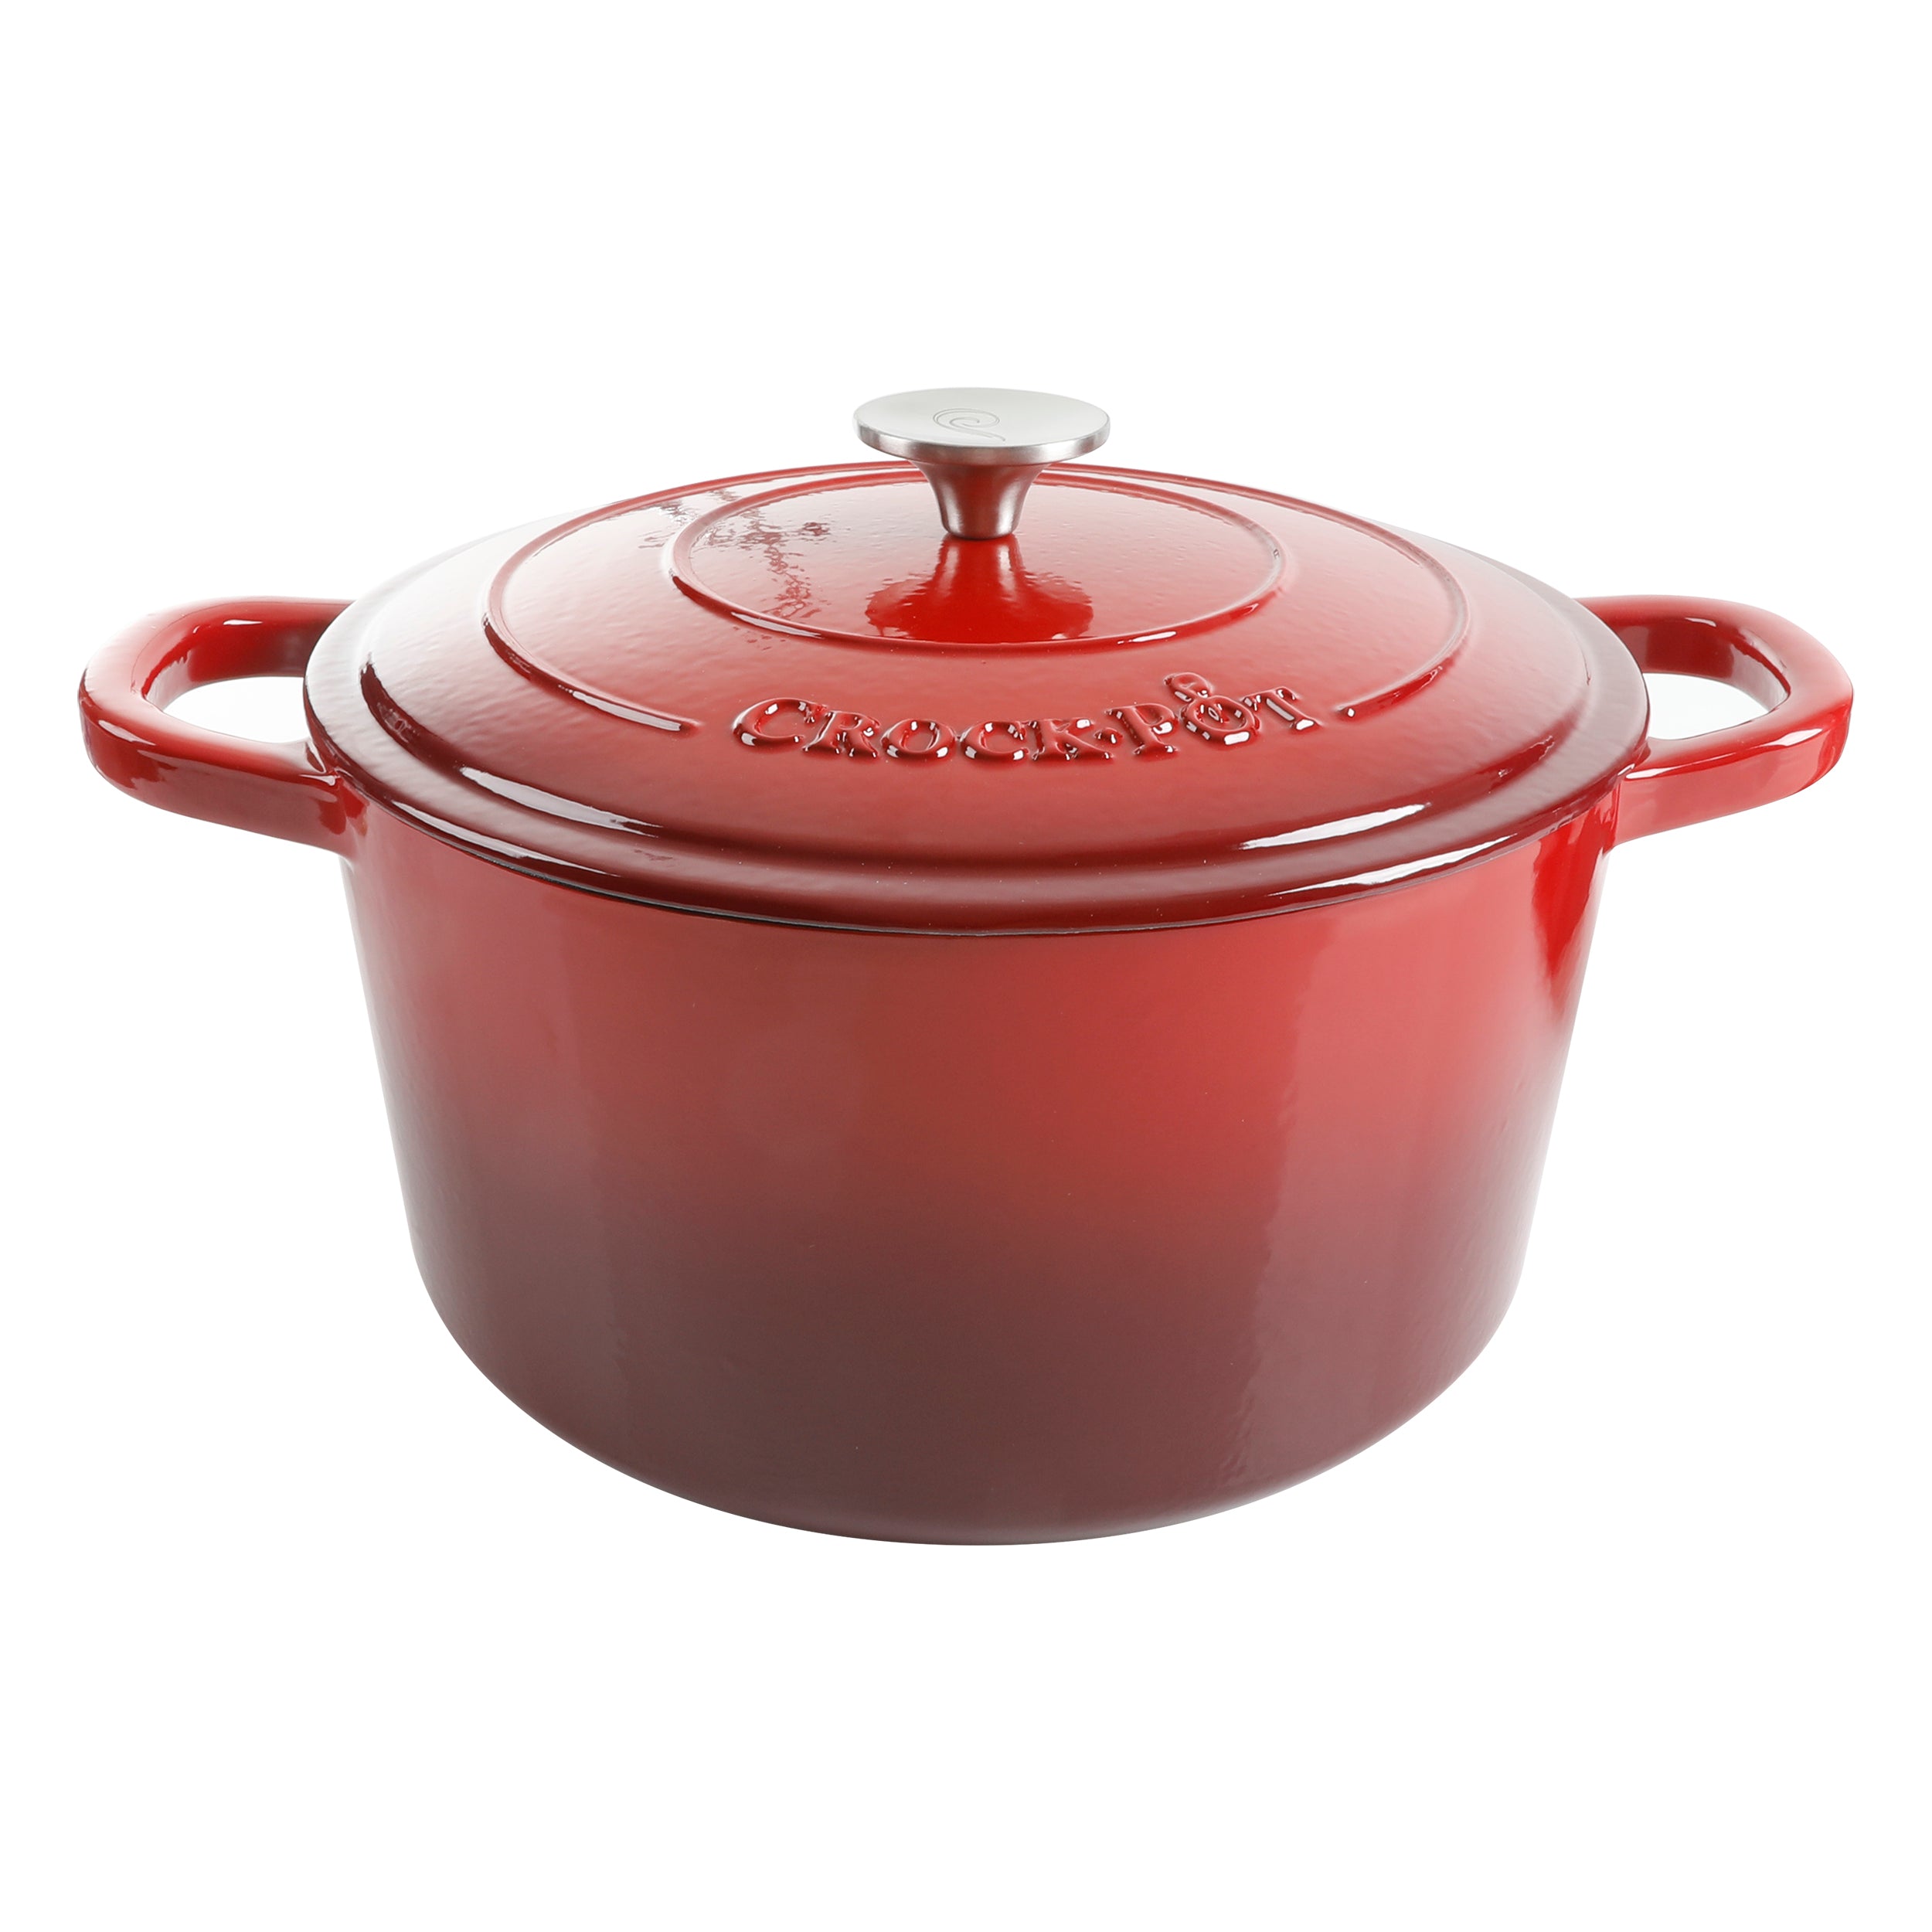 imarku | 5-Quart Enameled Cast Iron Dutch Oven Pot with Lid Nonstick Enamel  Coating Easy to Clean - Red